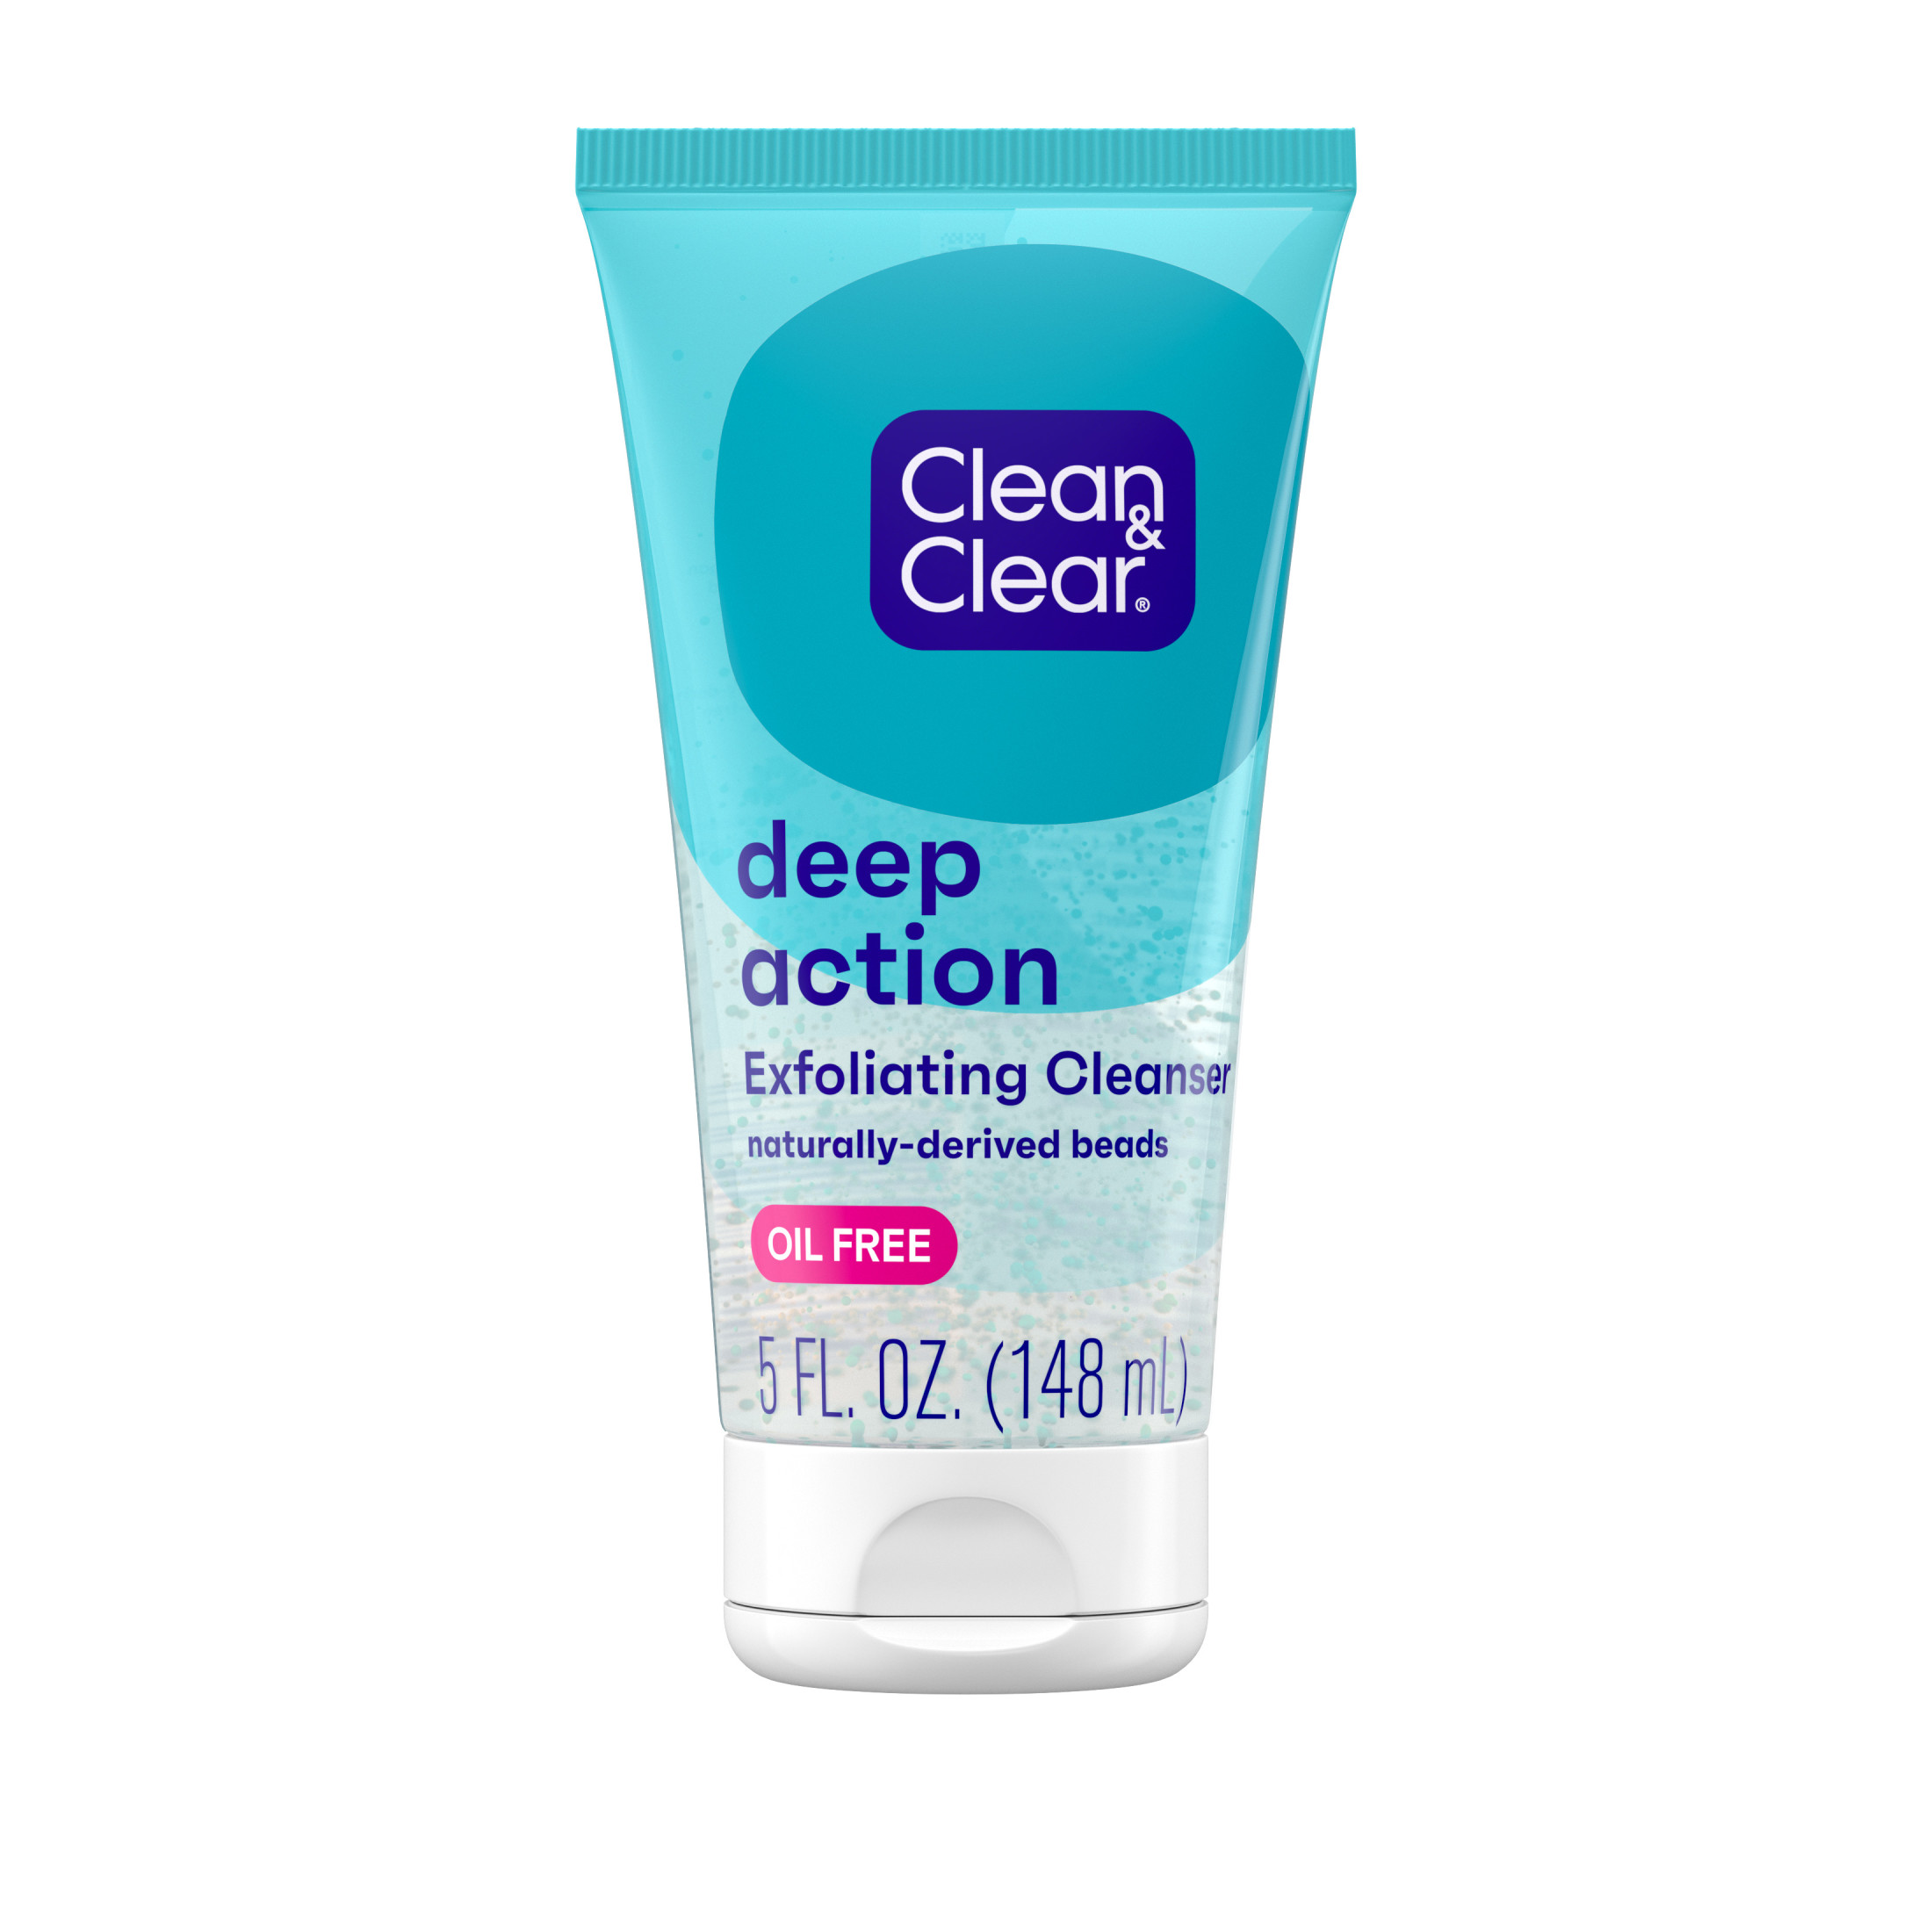 Clean & Clear Oil-Free Deep Action Exfoliating Facial Wash, 5 fl. oz - image 1 of 8